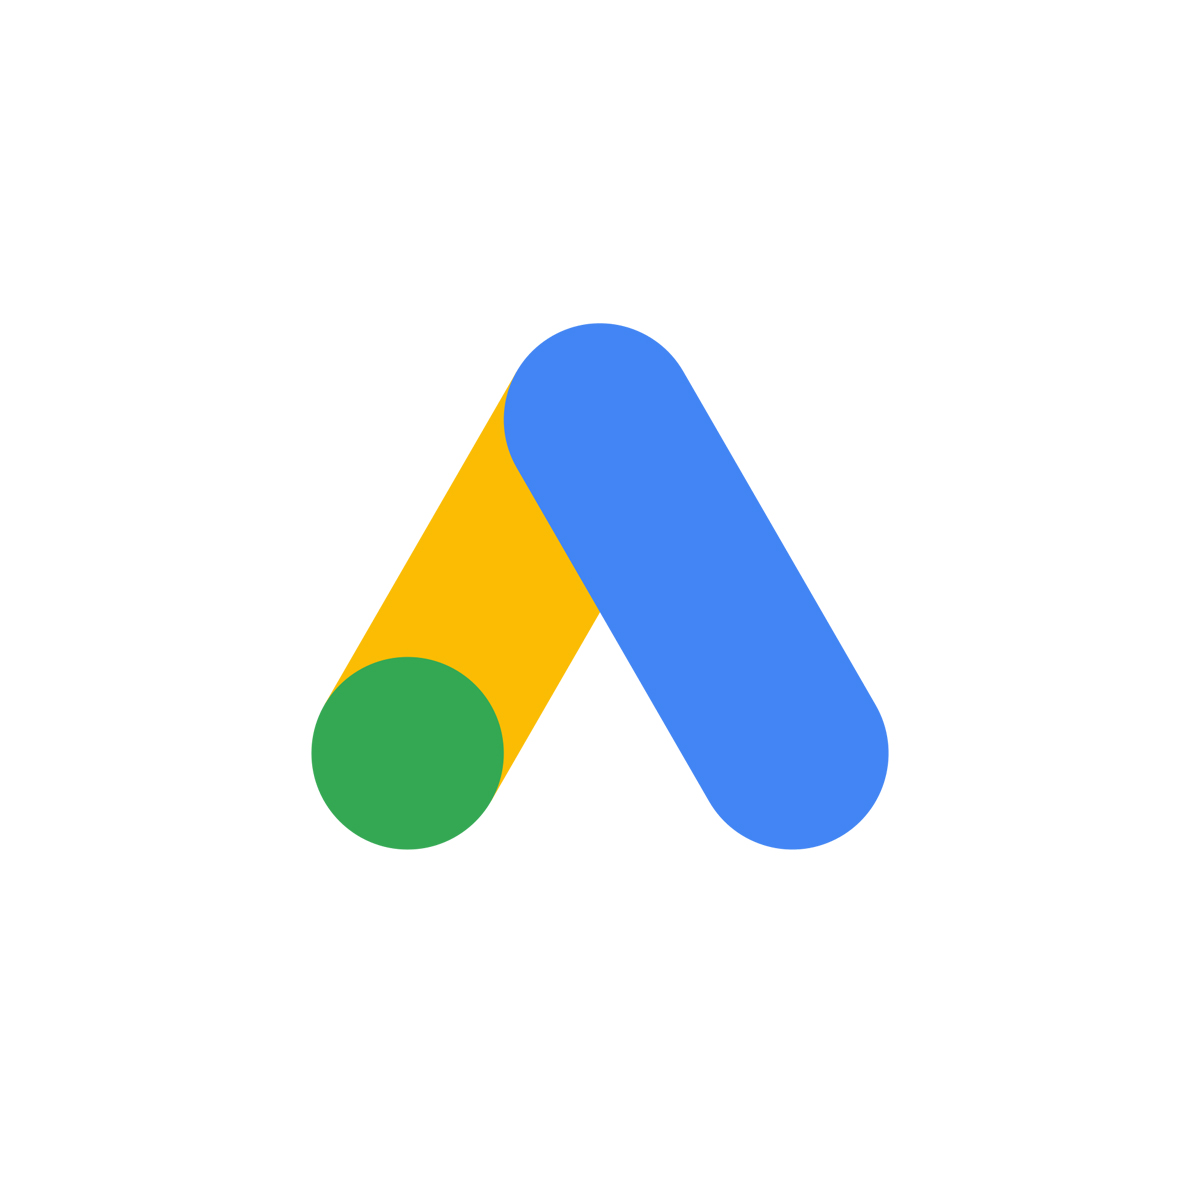 Google Ads, Tag Manager, Campaign Manager, Analytics, Data Studio